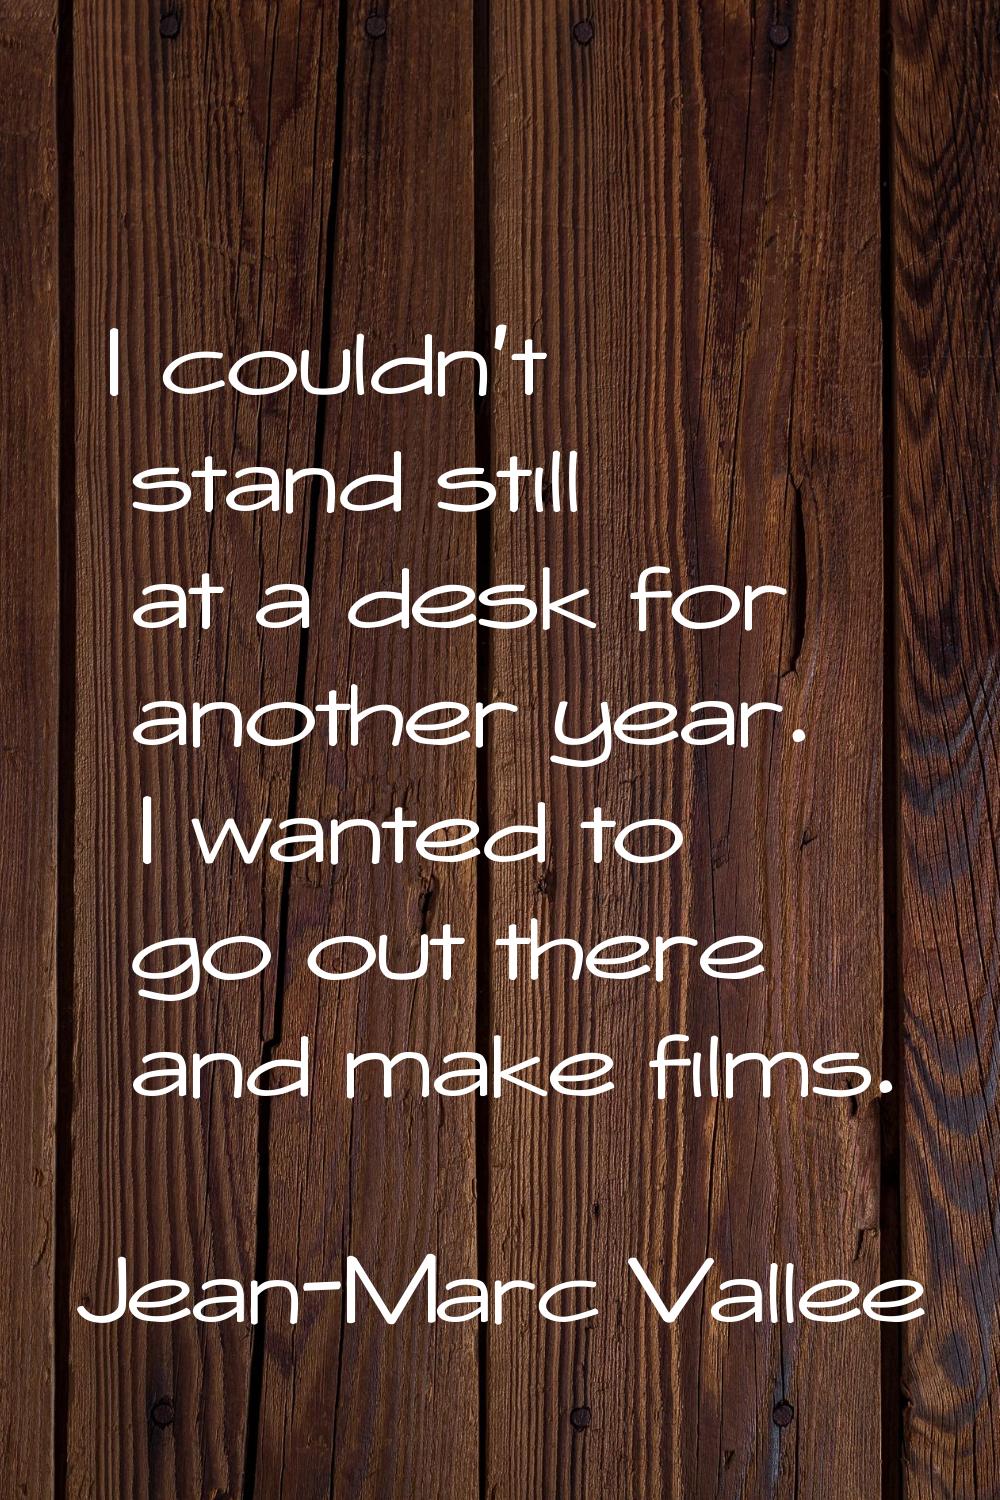 I couldn't stand still at a desk for another year. I wanted to go out there and make films.